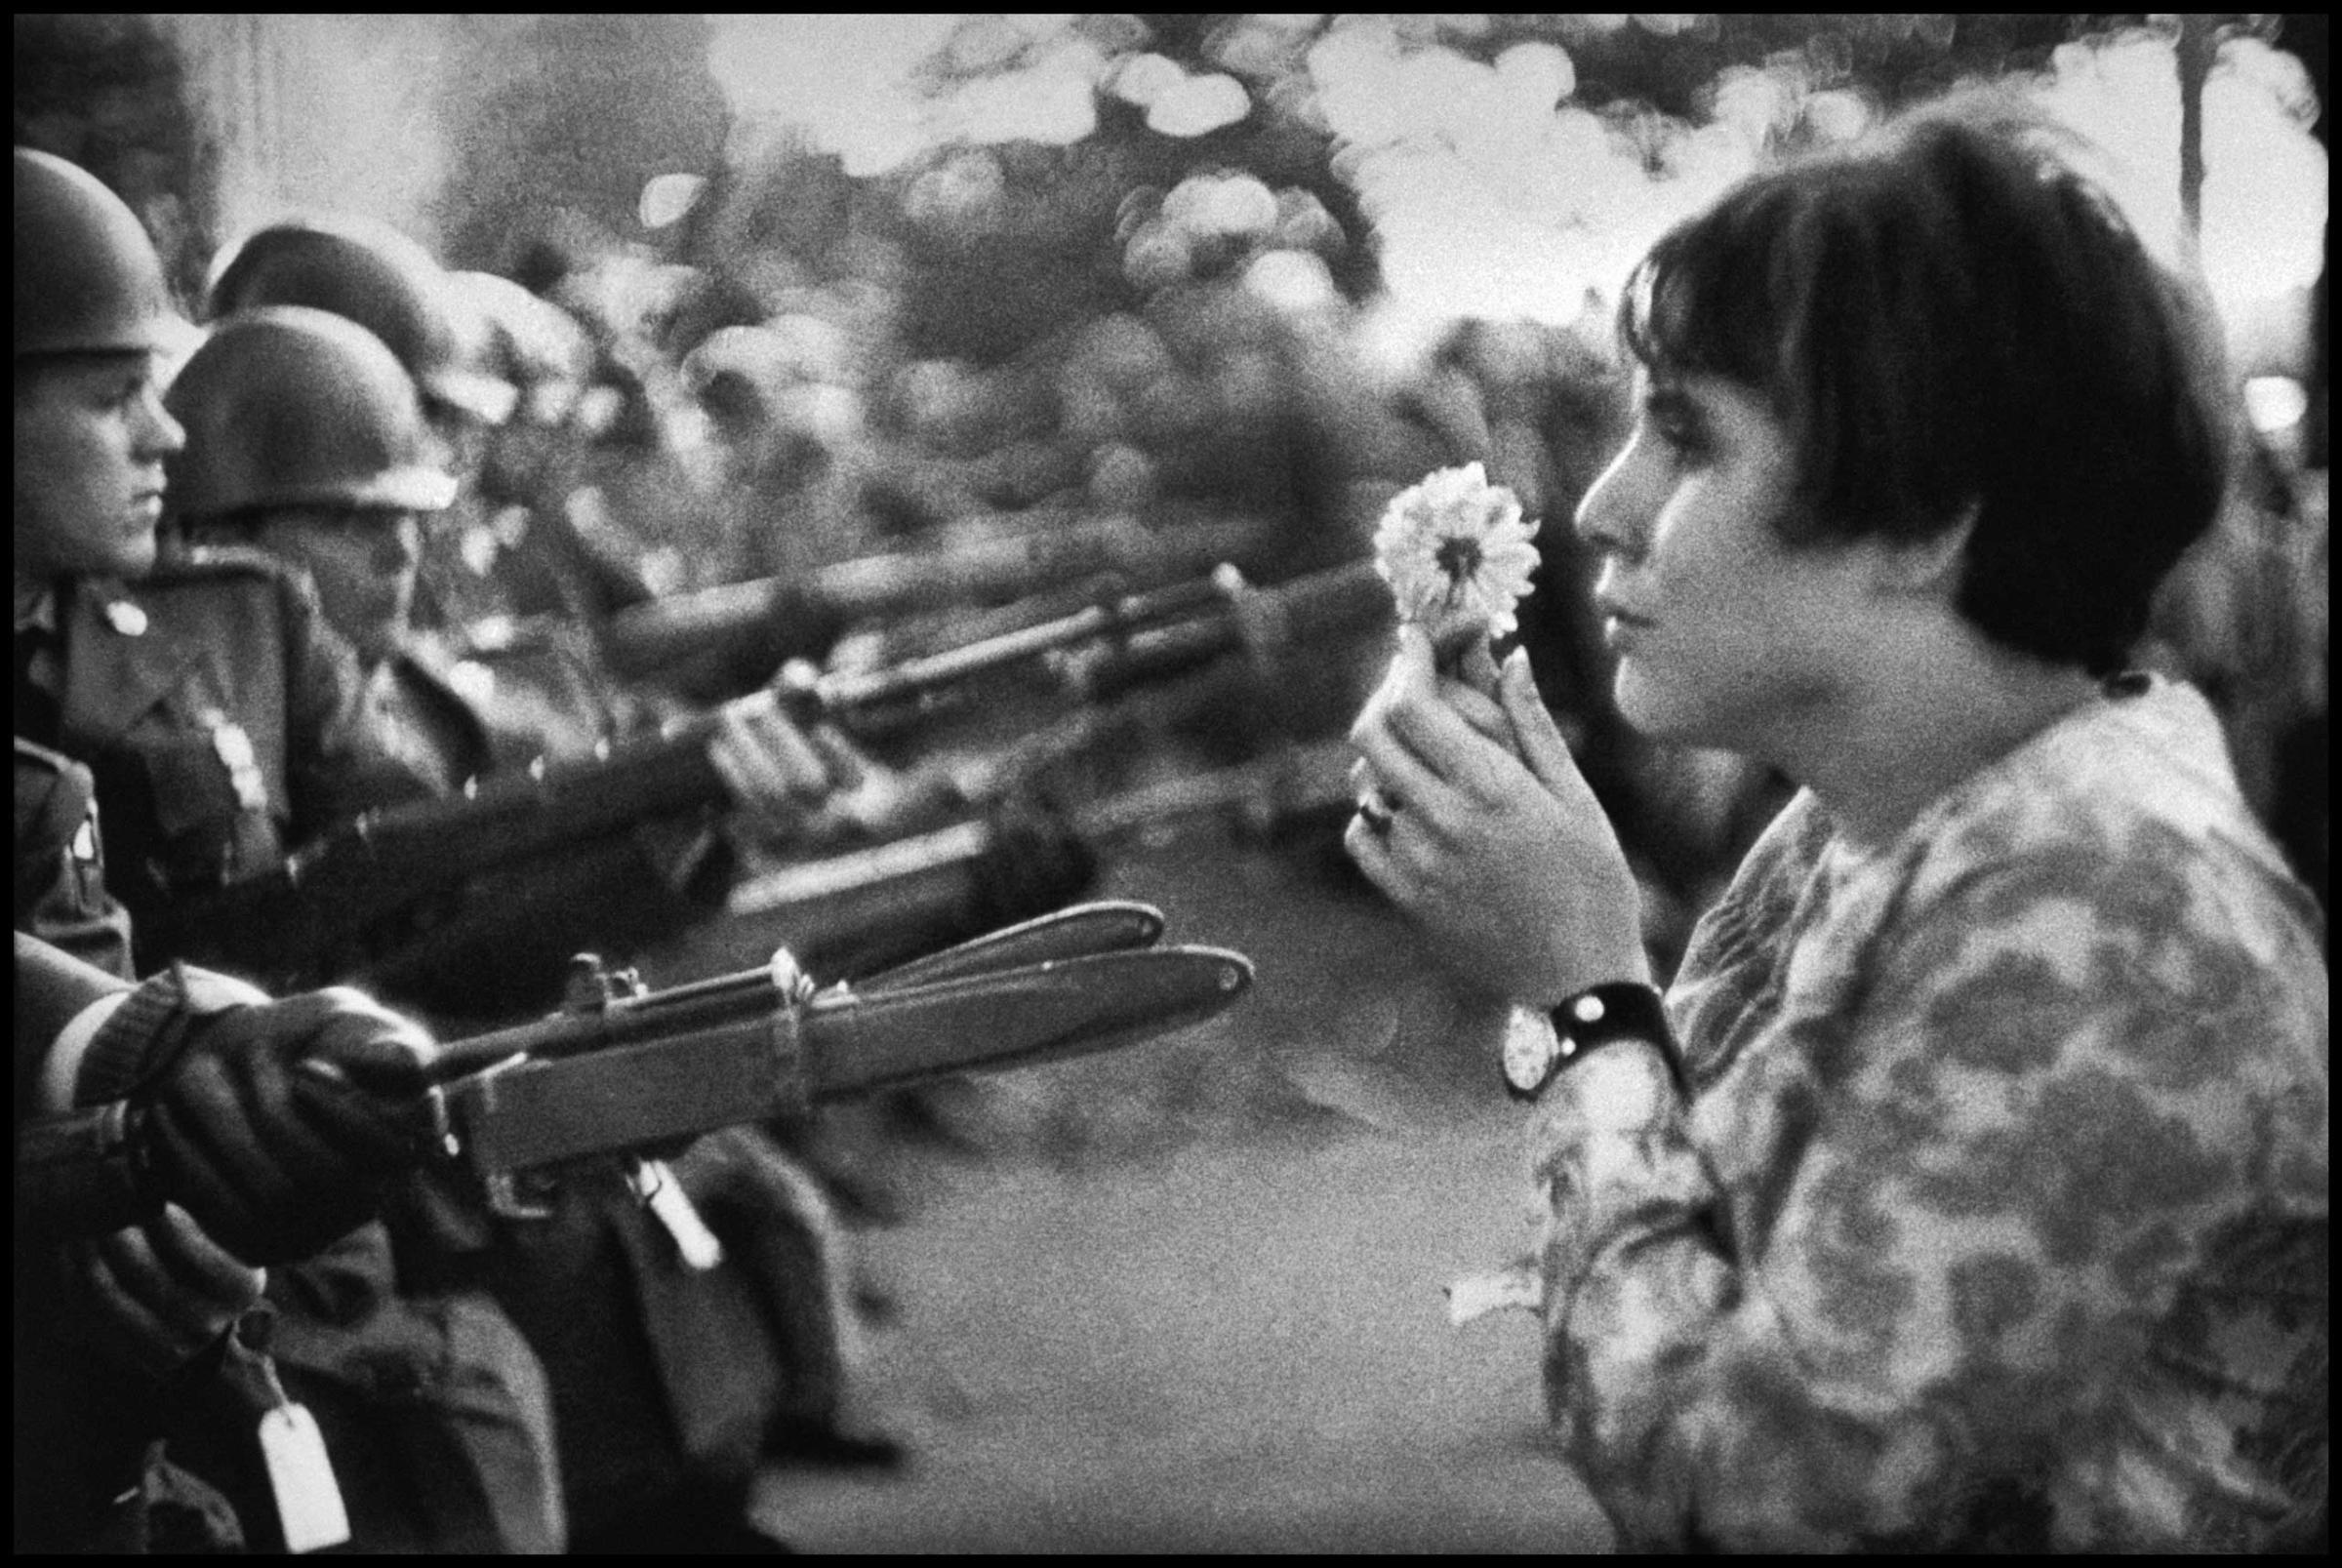 Jan Rose Kasmir confronts the American National Guard outside the Pentagon in Washington during the 1967 anti-Vietnam march.